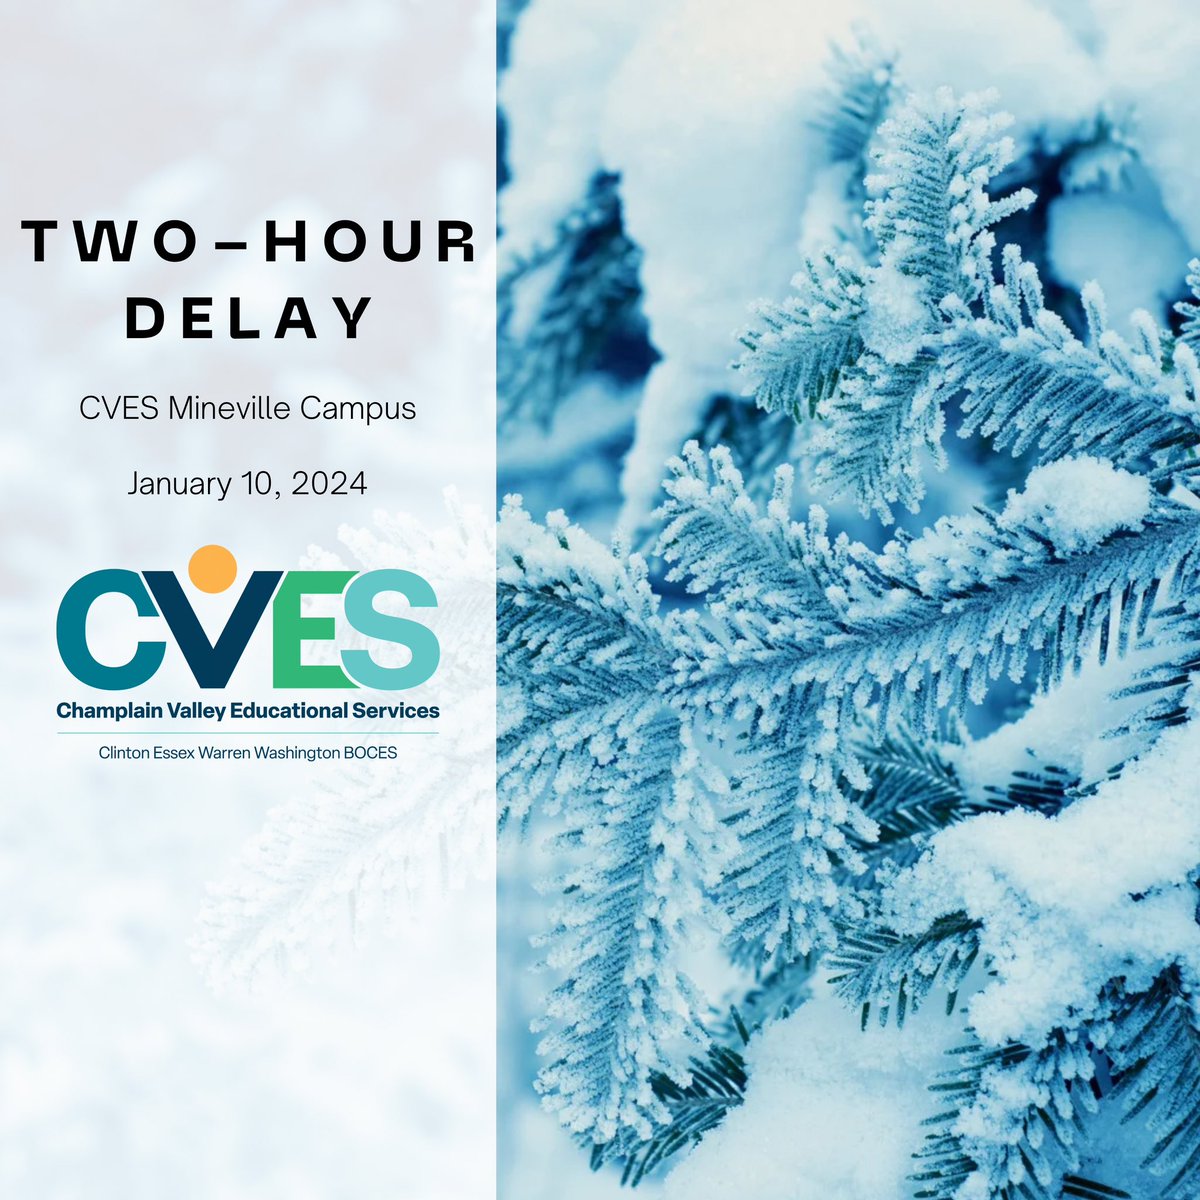 Our Mineville Campus will begin Wednesday, January 10, 2024, on a Two-Hour Delay due to the anticipated and ongoing inclement weather.